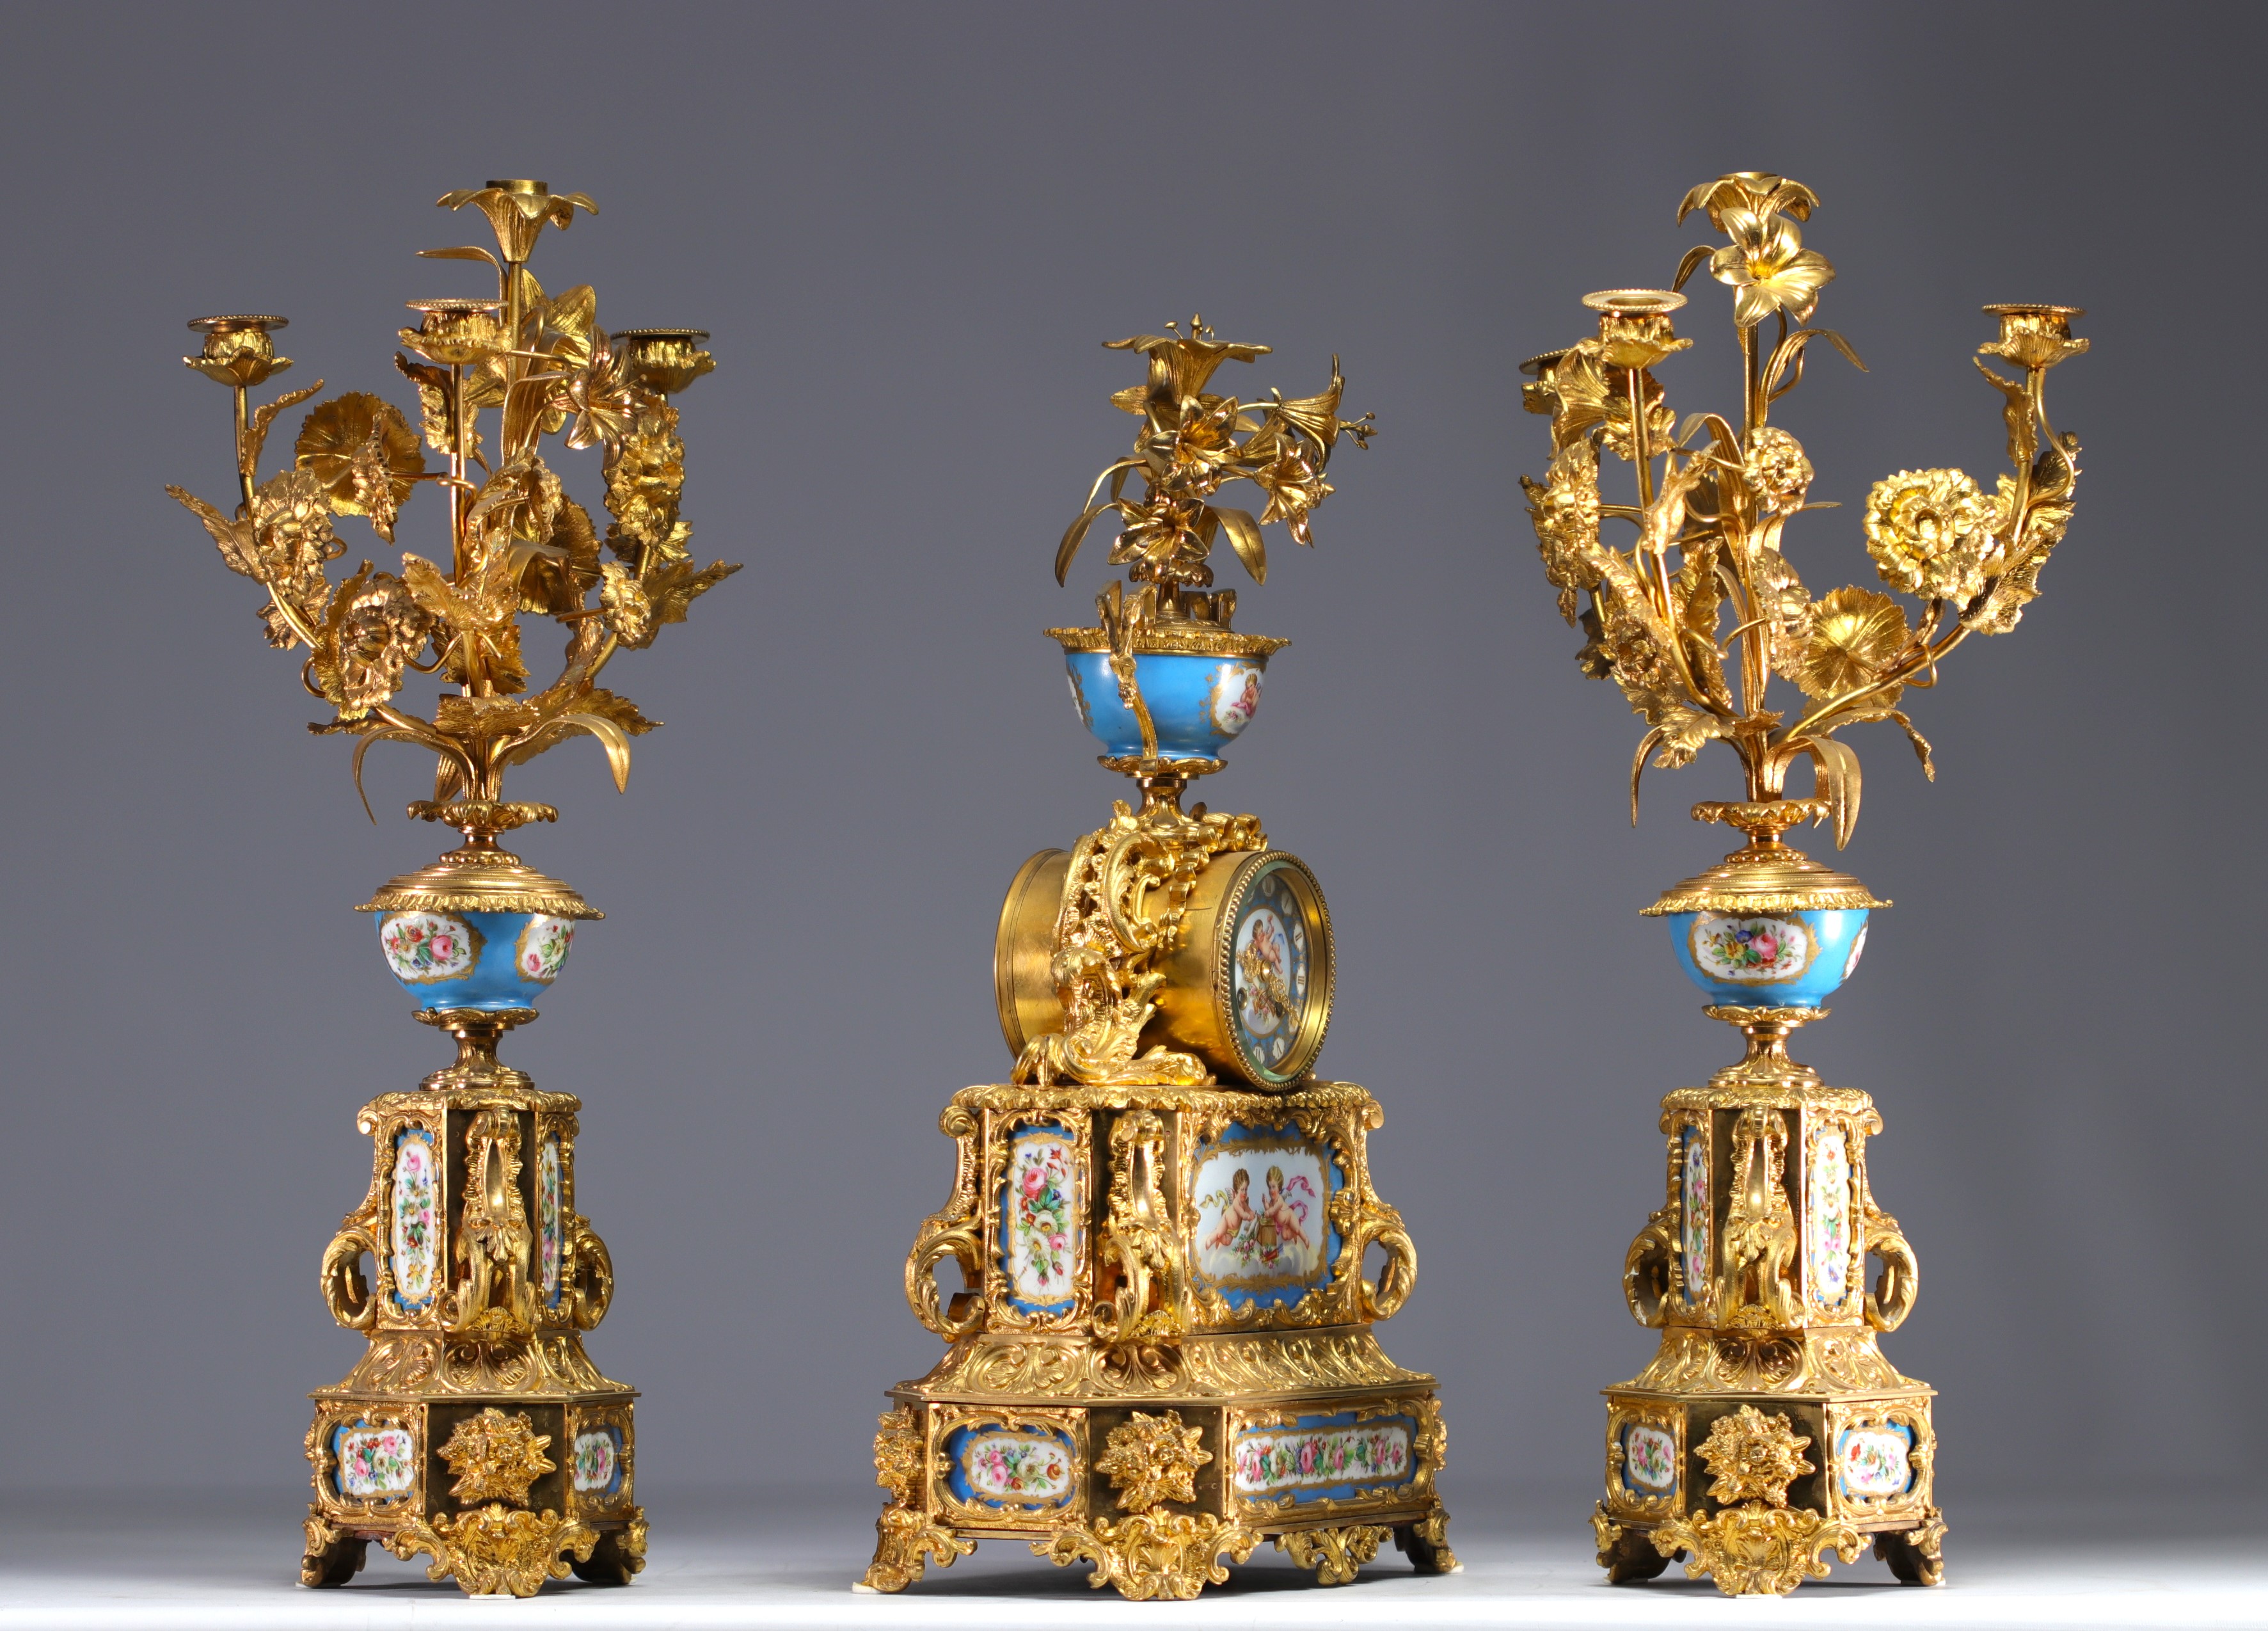 Imposing Sevres porcelain and gilded bronze mantelpiece. - Image 2 of 3